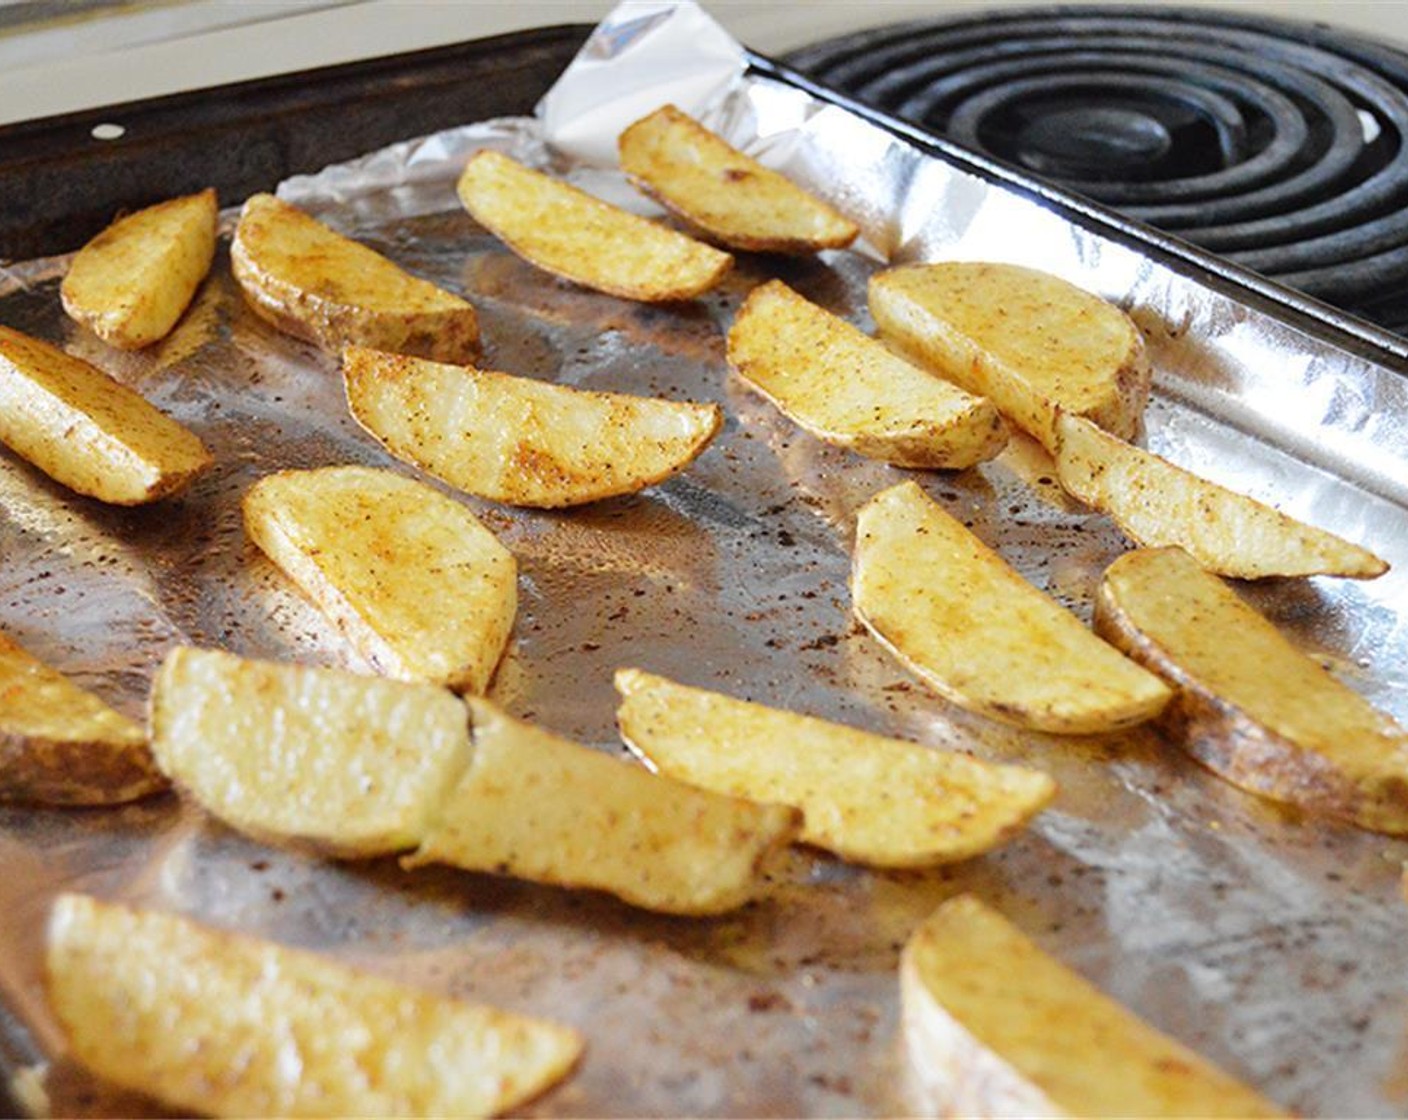 step 3 Spread wedges on a lined and greased baking sheet. Bake at 400 degrees F (200 degrees C) for 15-20 minutes or until fries are soft.